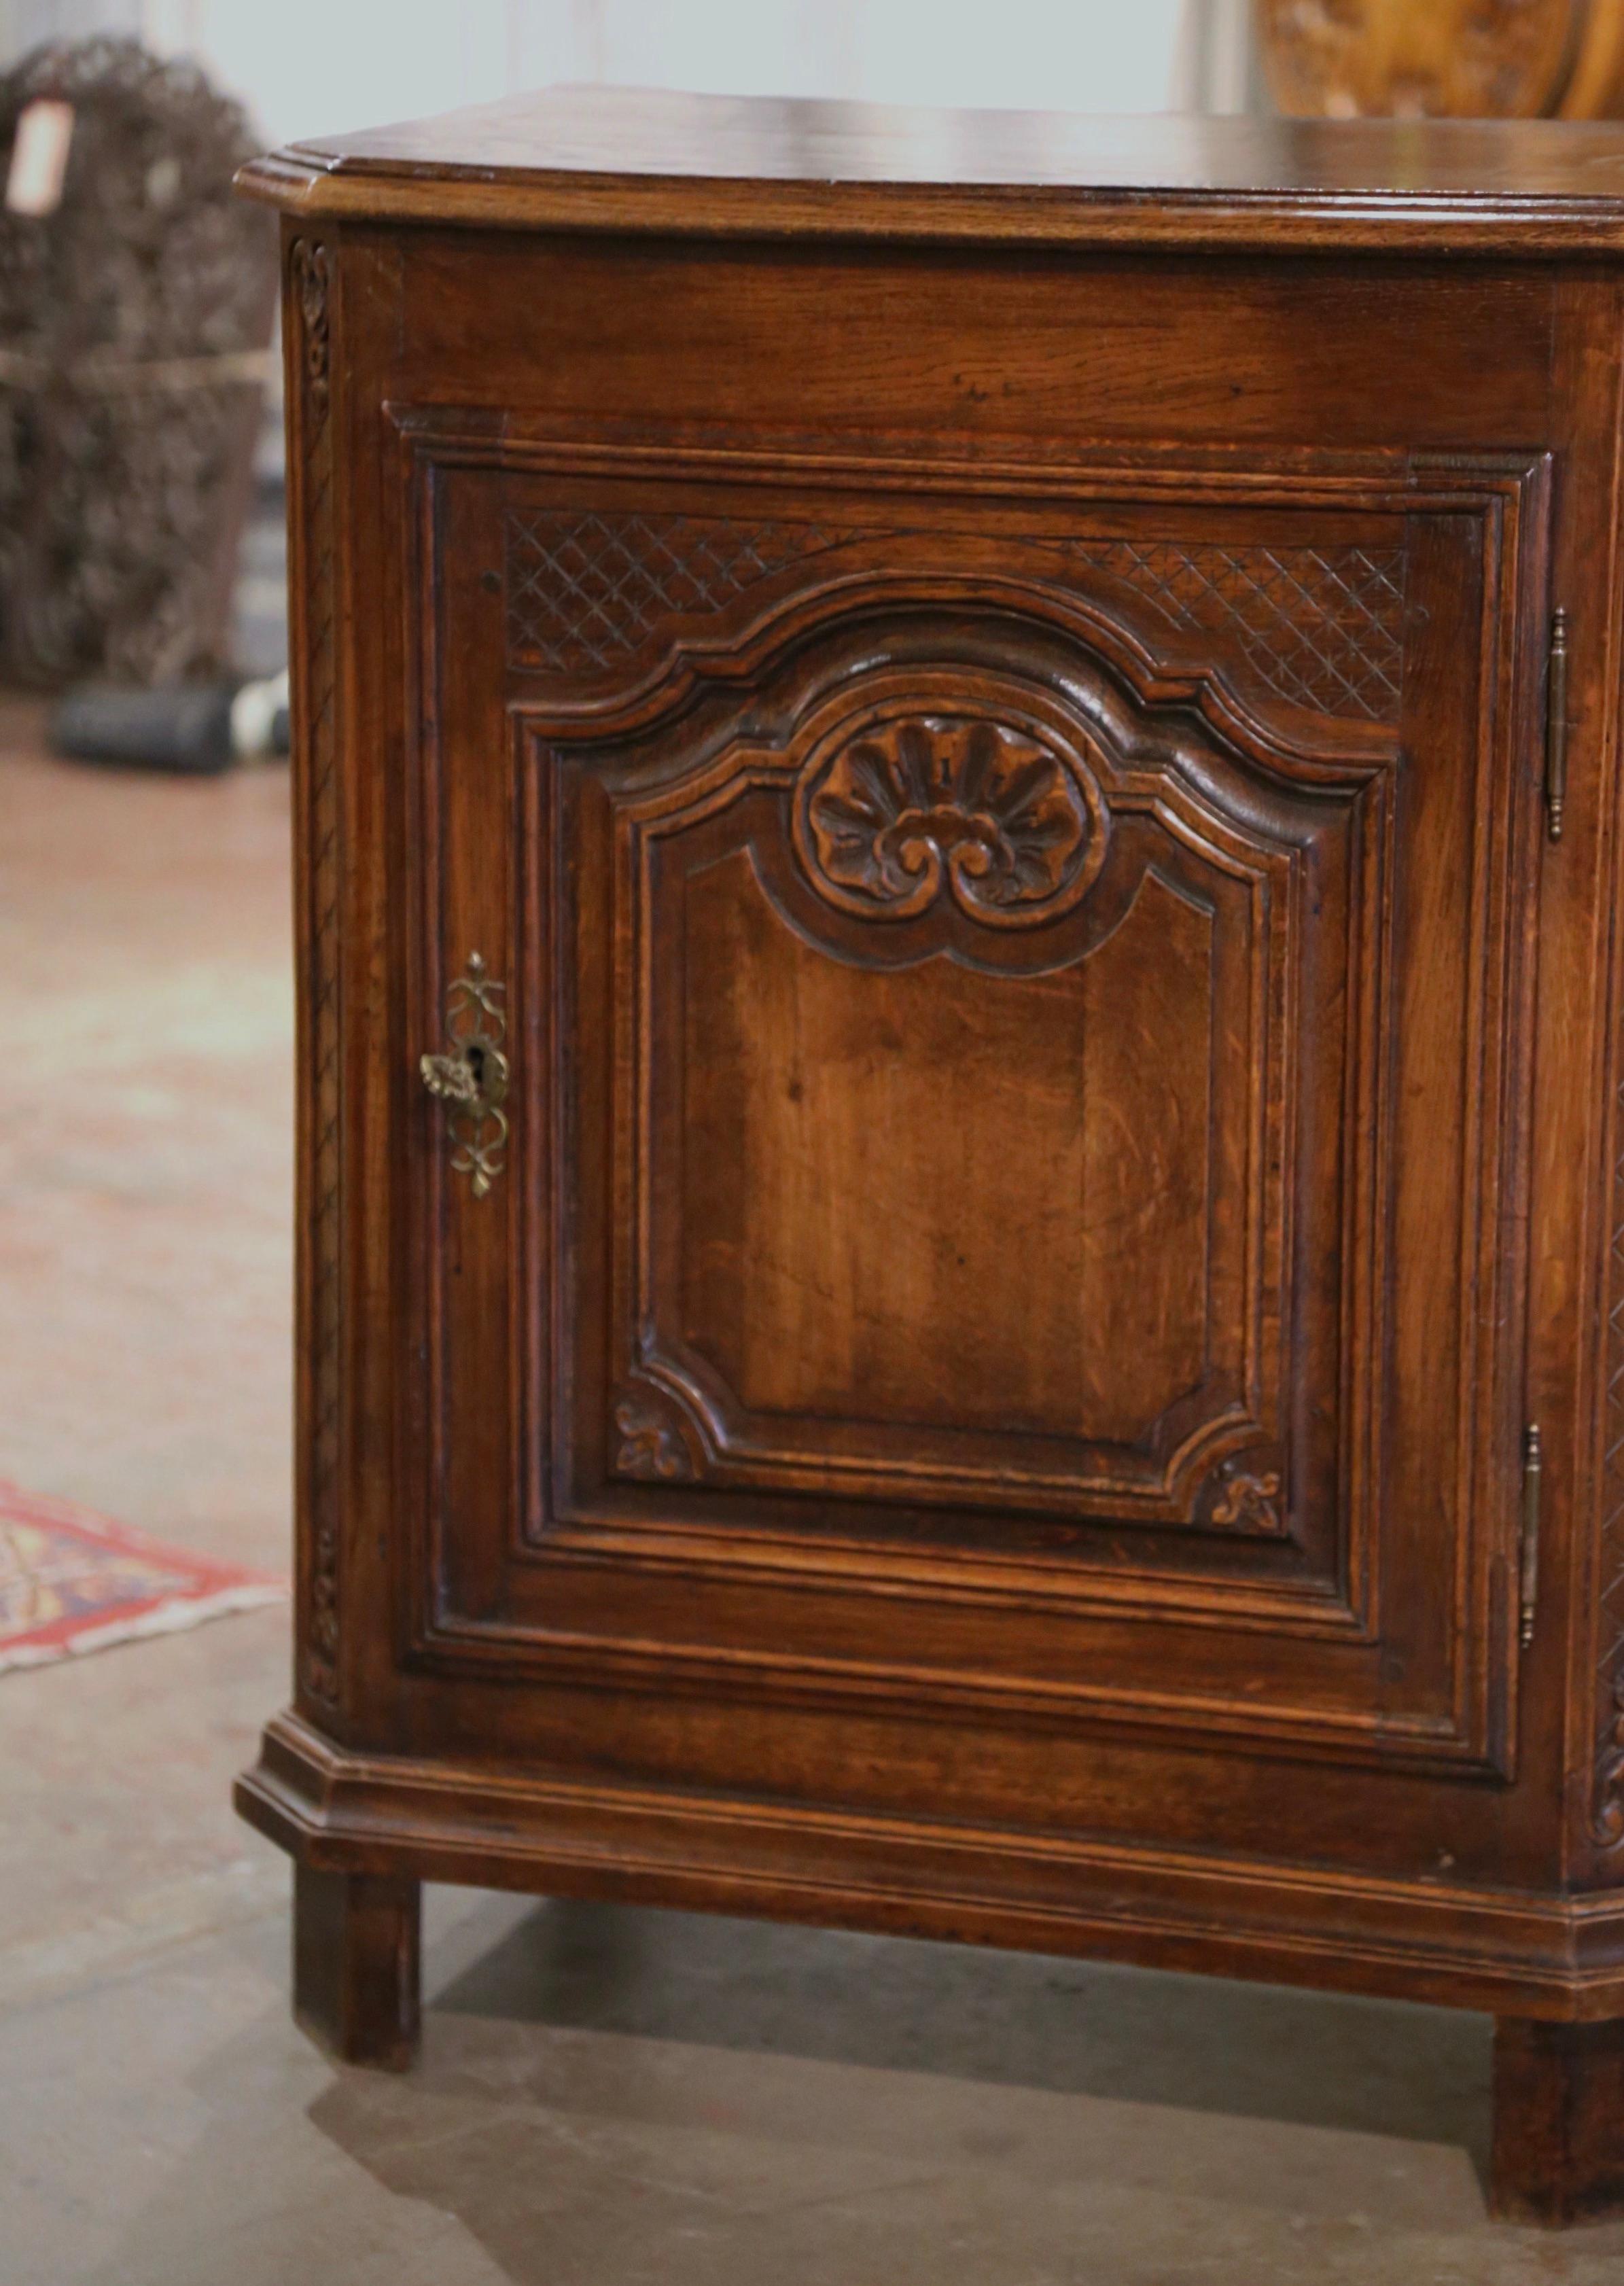 Hand-Carved Early 20th Century French Louis XIV Oak Confiturier Jelly Cabinet from Normandy